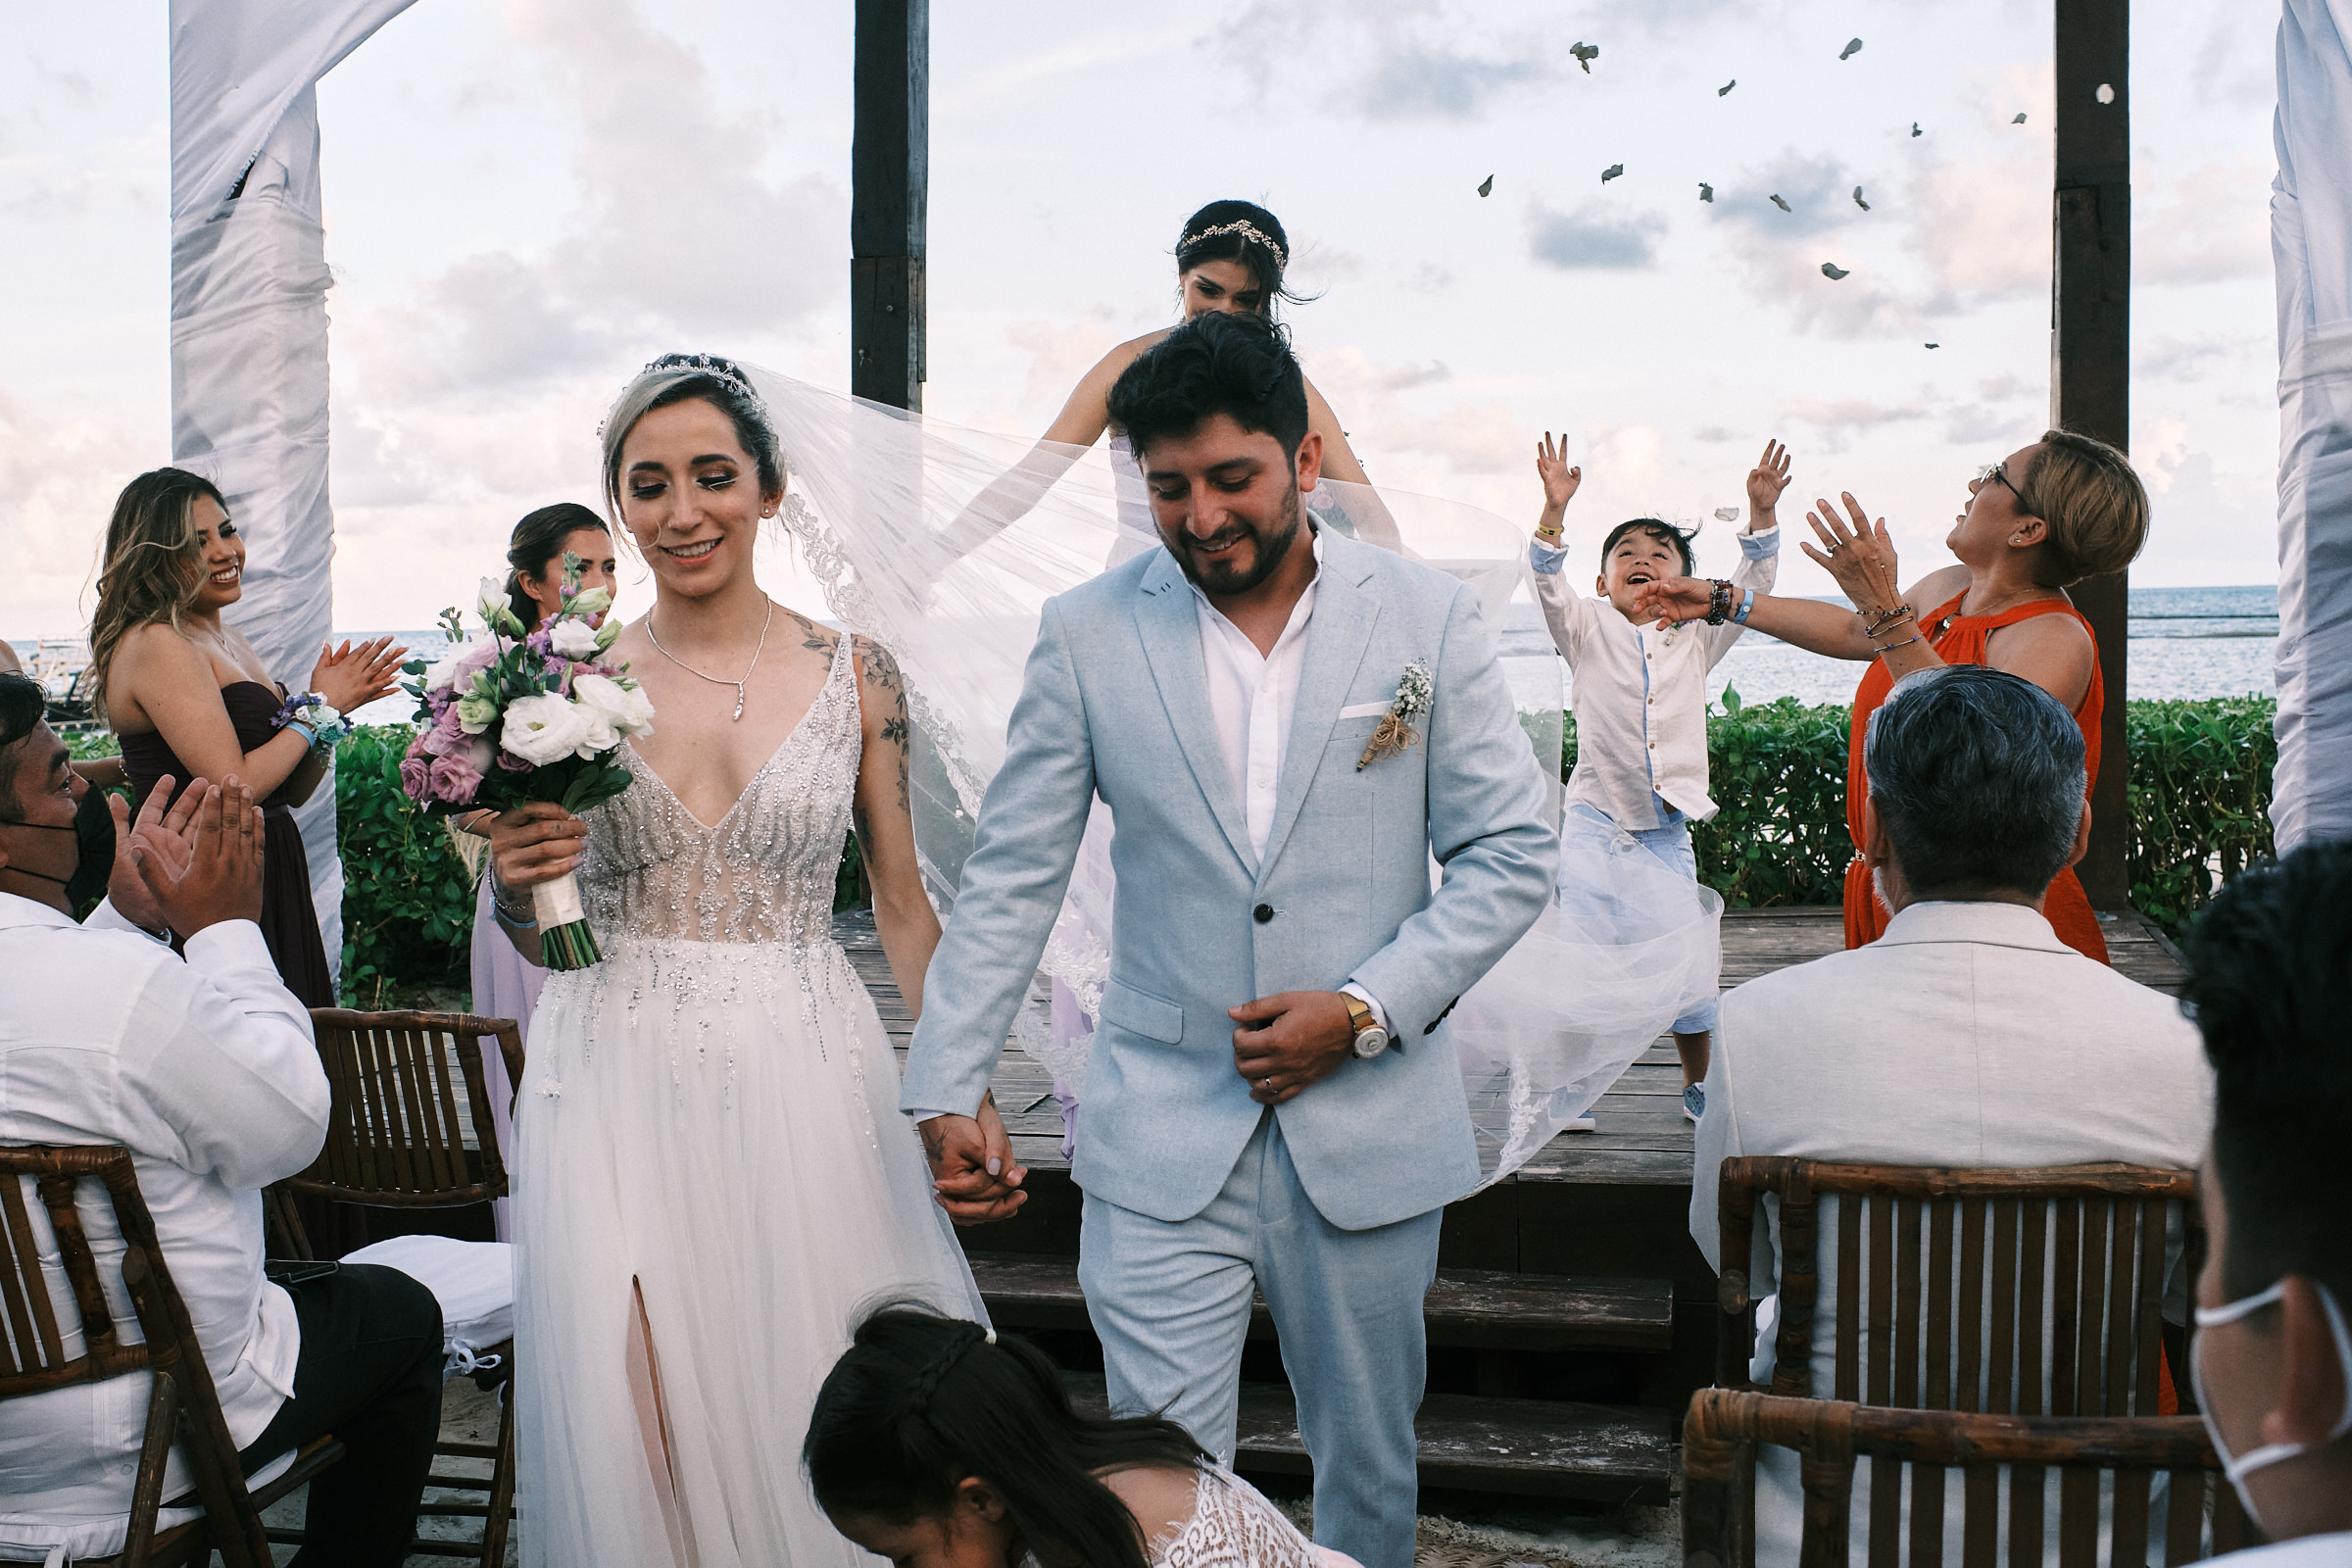 Bride And Groom Exit Their Ceremony As Their Son Throws Petals In The Air